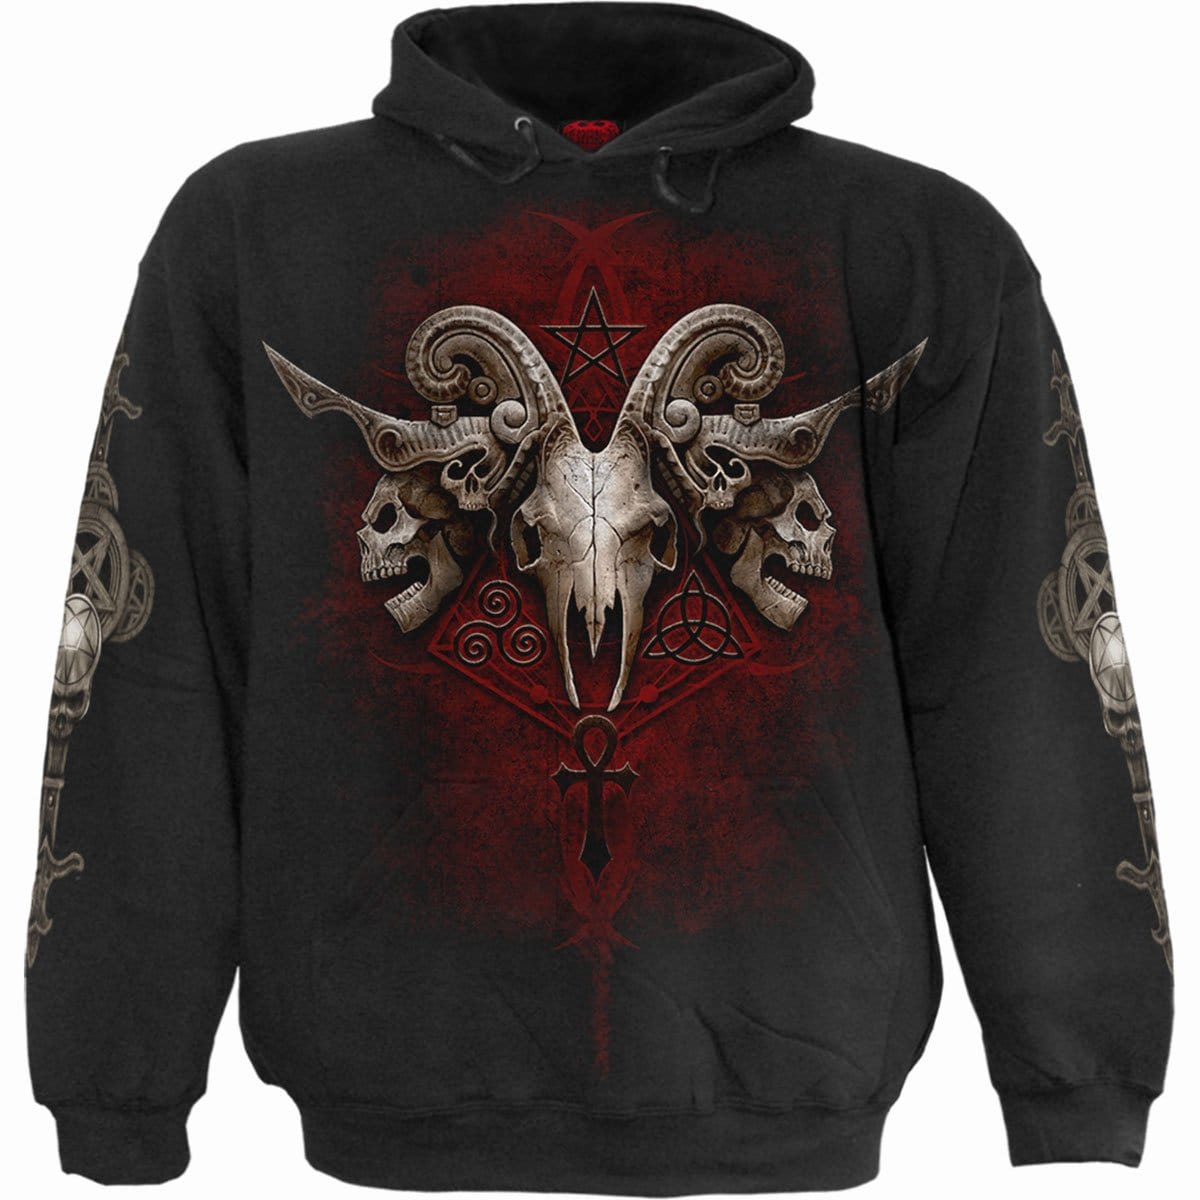 FACES OF GOTH - Hoody Black - Spiral USA